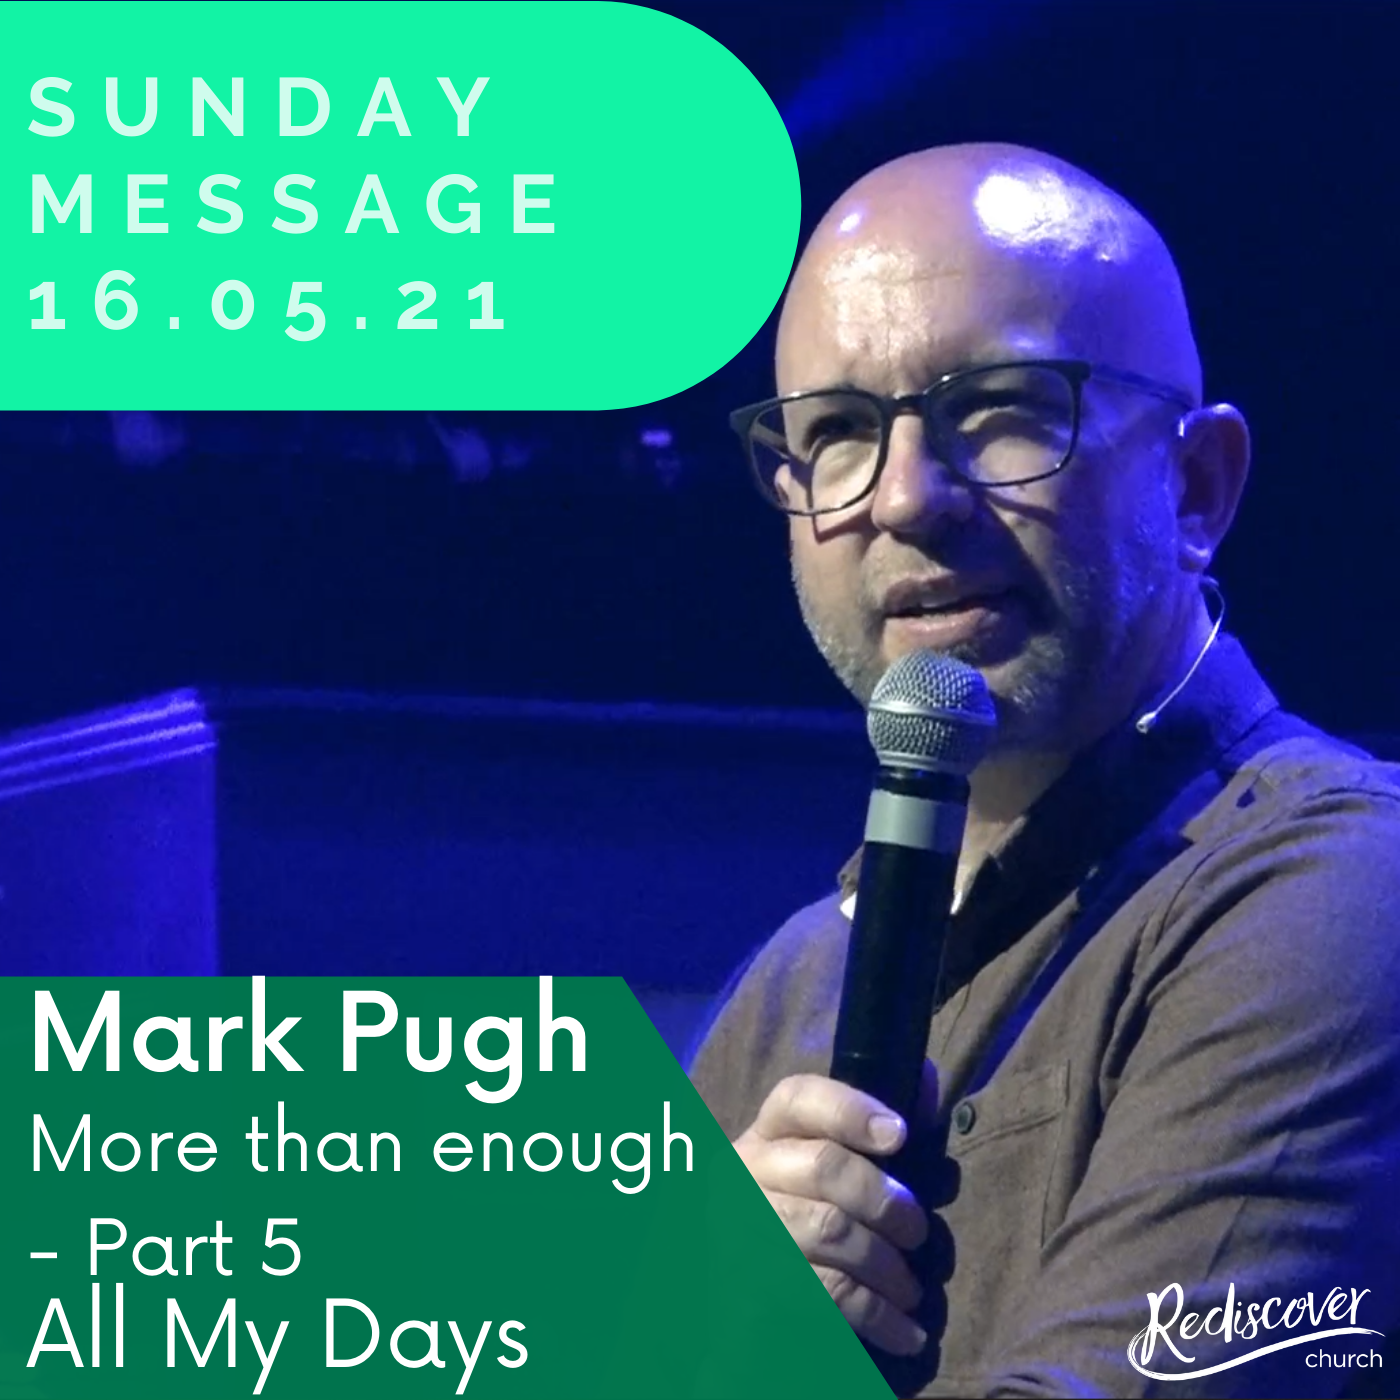 Mark Pugh - Sunday Message | More than enough - Part 5 | All My Days